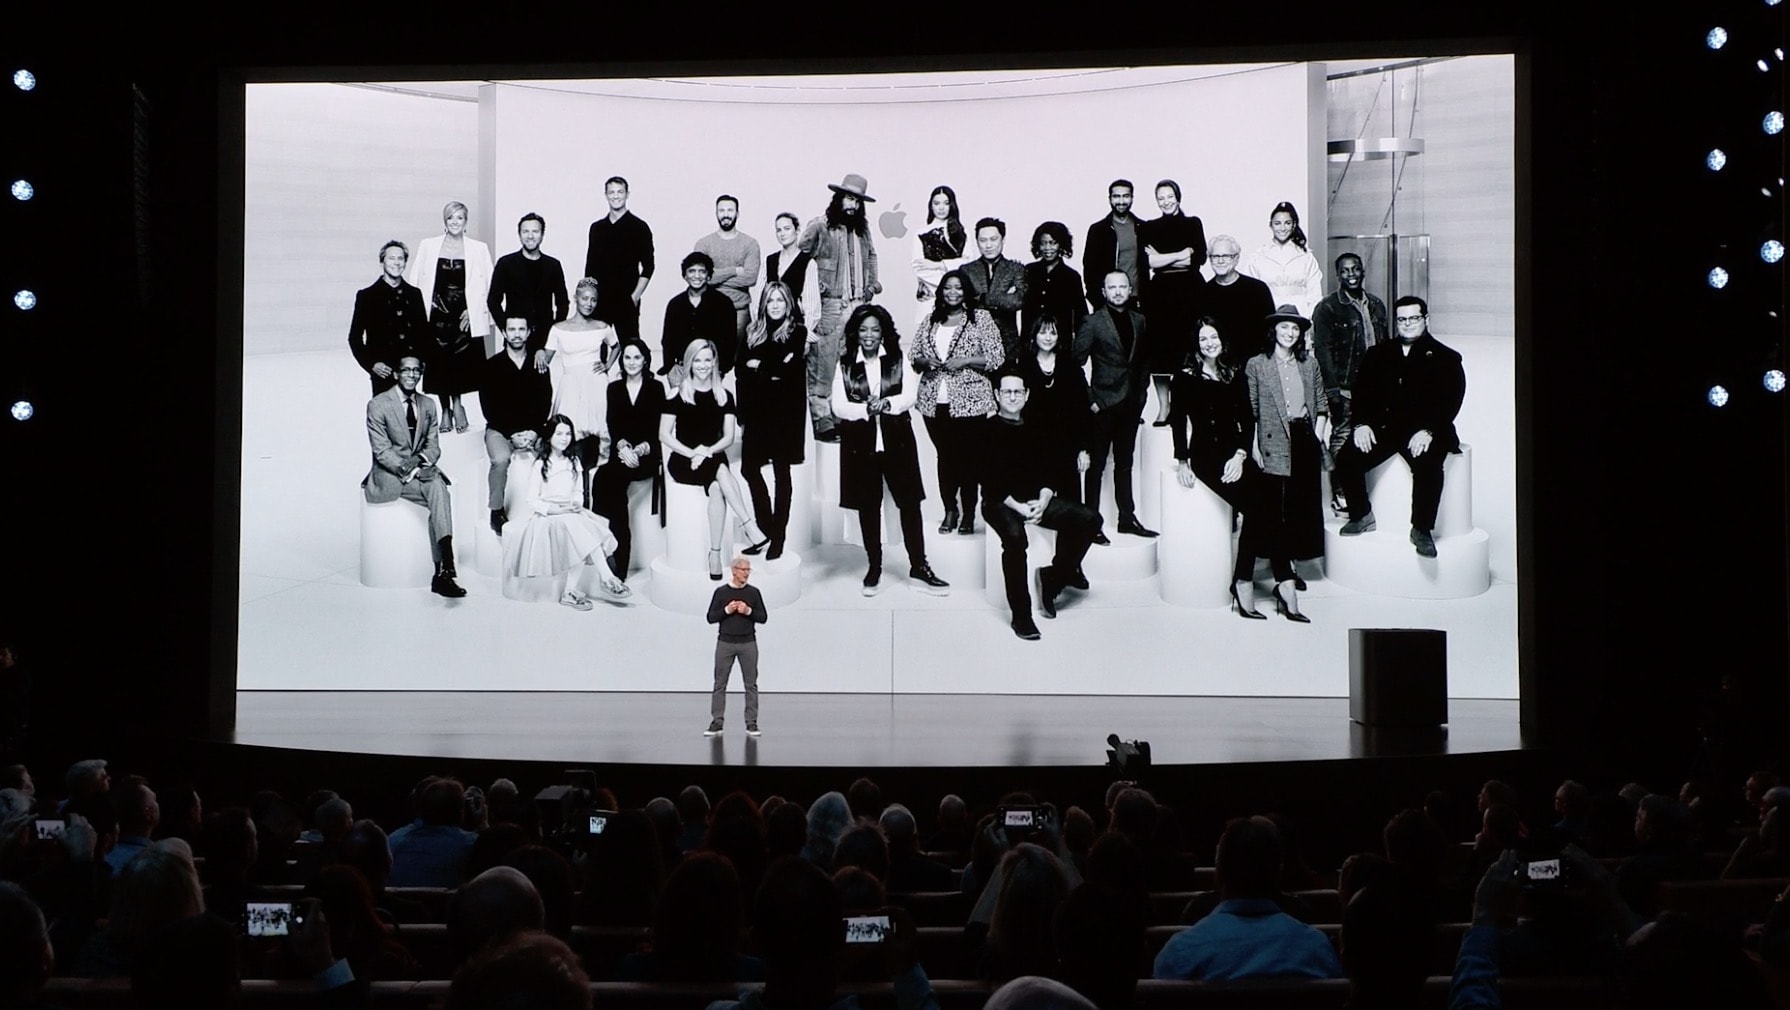 Apple has some of the best storytellers in the world working on Apple TV+.